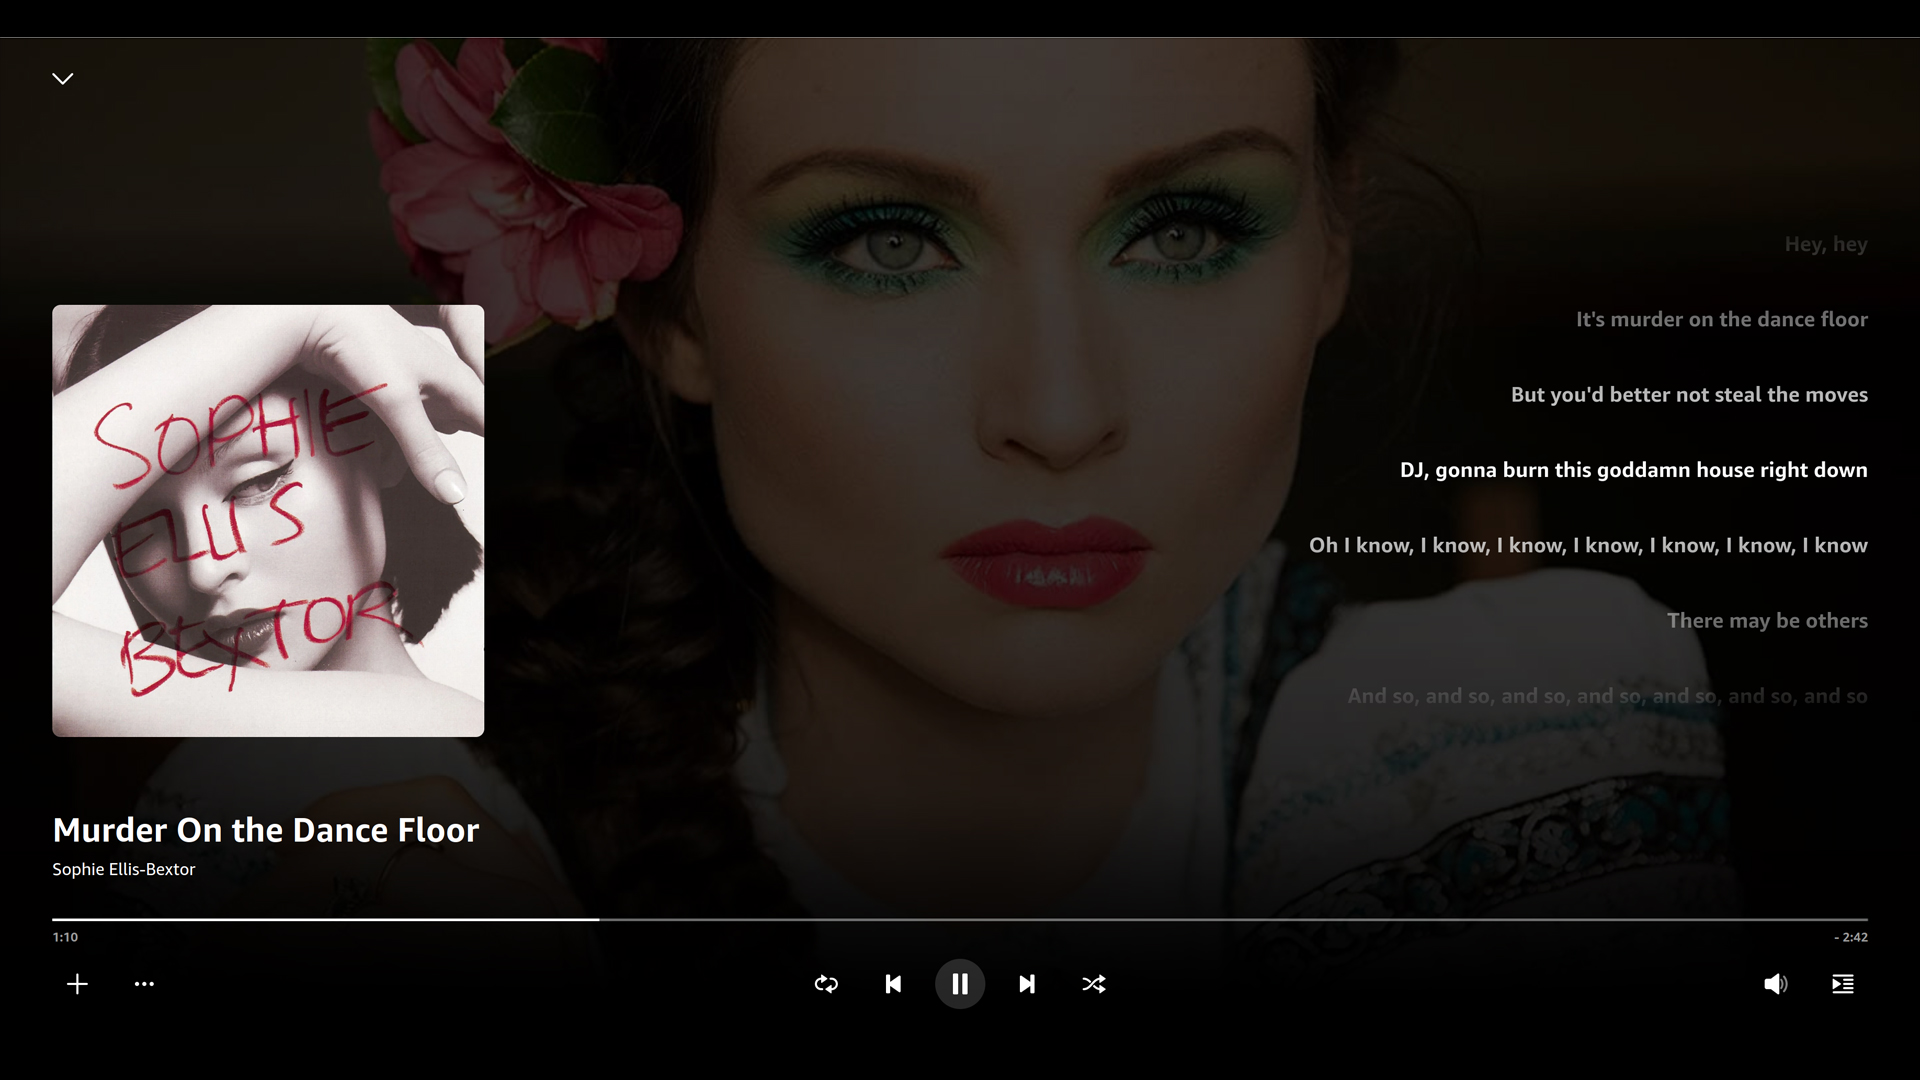 A screenshot of the Amazon Music web player showing the album art of Sophie Ellis-Bextor's &quot;Murder on the Dance Floor&quot; and the current lyrics from 1:10 in the song which read: &quot;Hey, hey It's murder on the dancefloor / But you better not steal the moves / DJ, gonna burn this goddamn house right down / Oh I know, I know, I know, I know, I know, I know / There may be others / And so, and so, and so, and so, and so, and so...&quot; In the background is the artist's face with colorful makeup on and a flower in her hair.